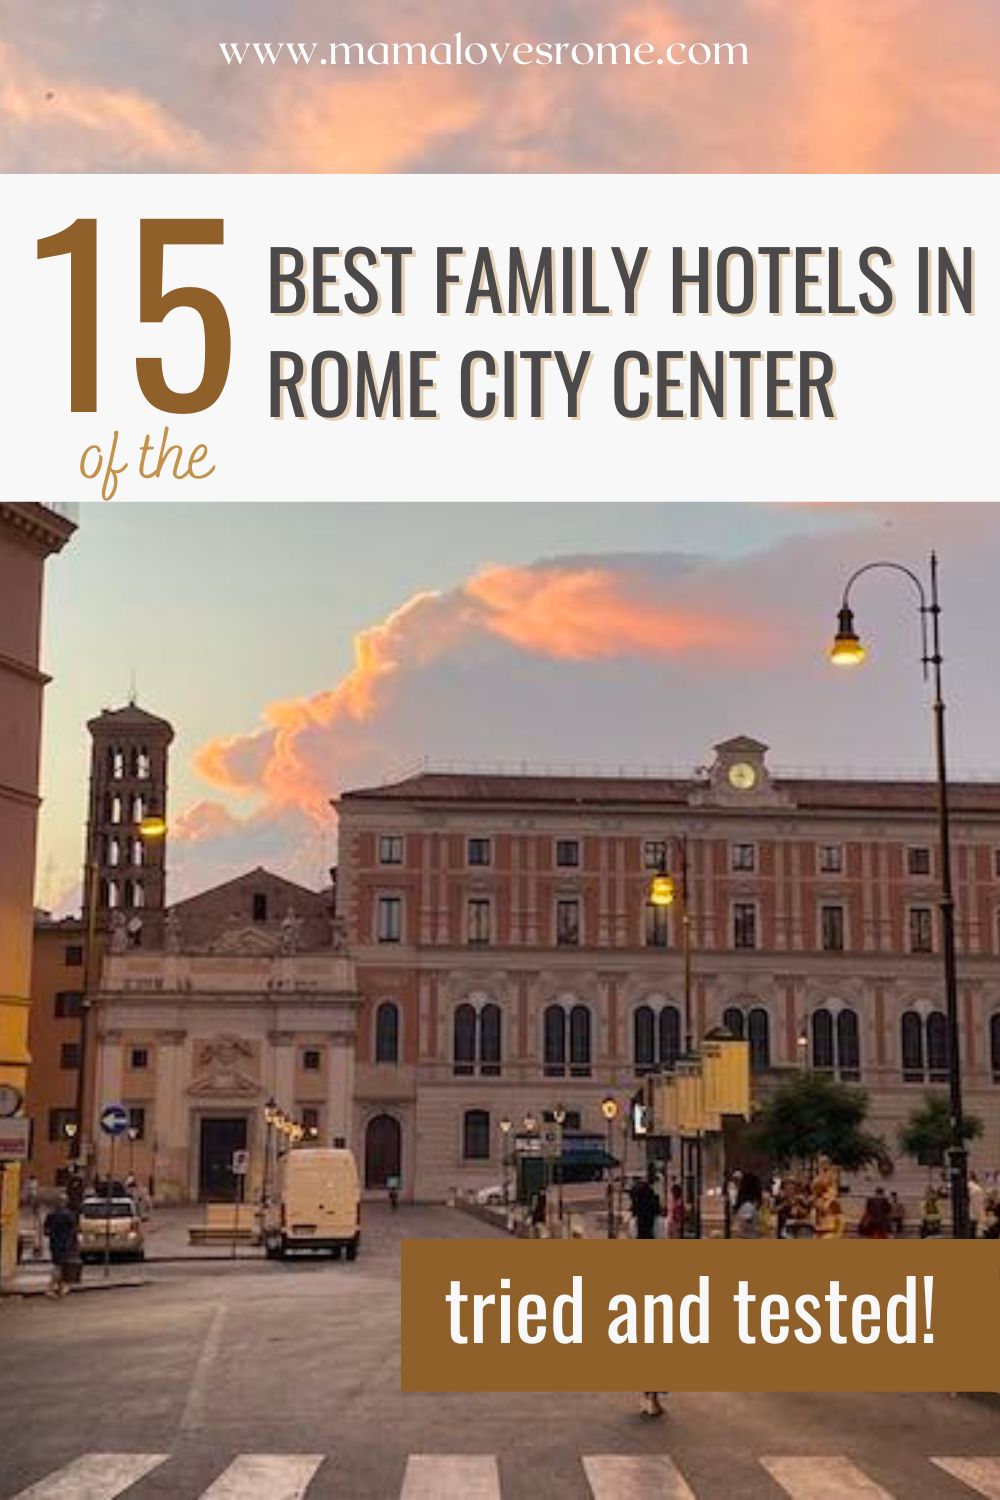 Image of beautiful Rome piazza at sunset with text: 15 of the best family hotels in Rome city center, tried and tested!